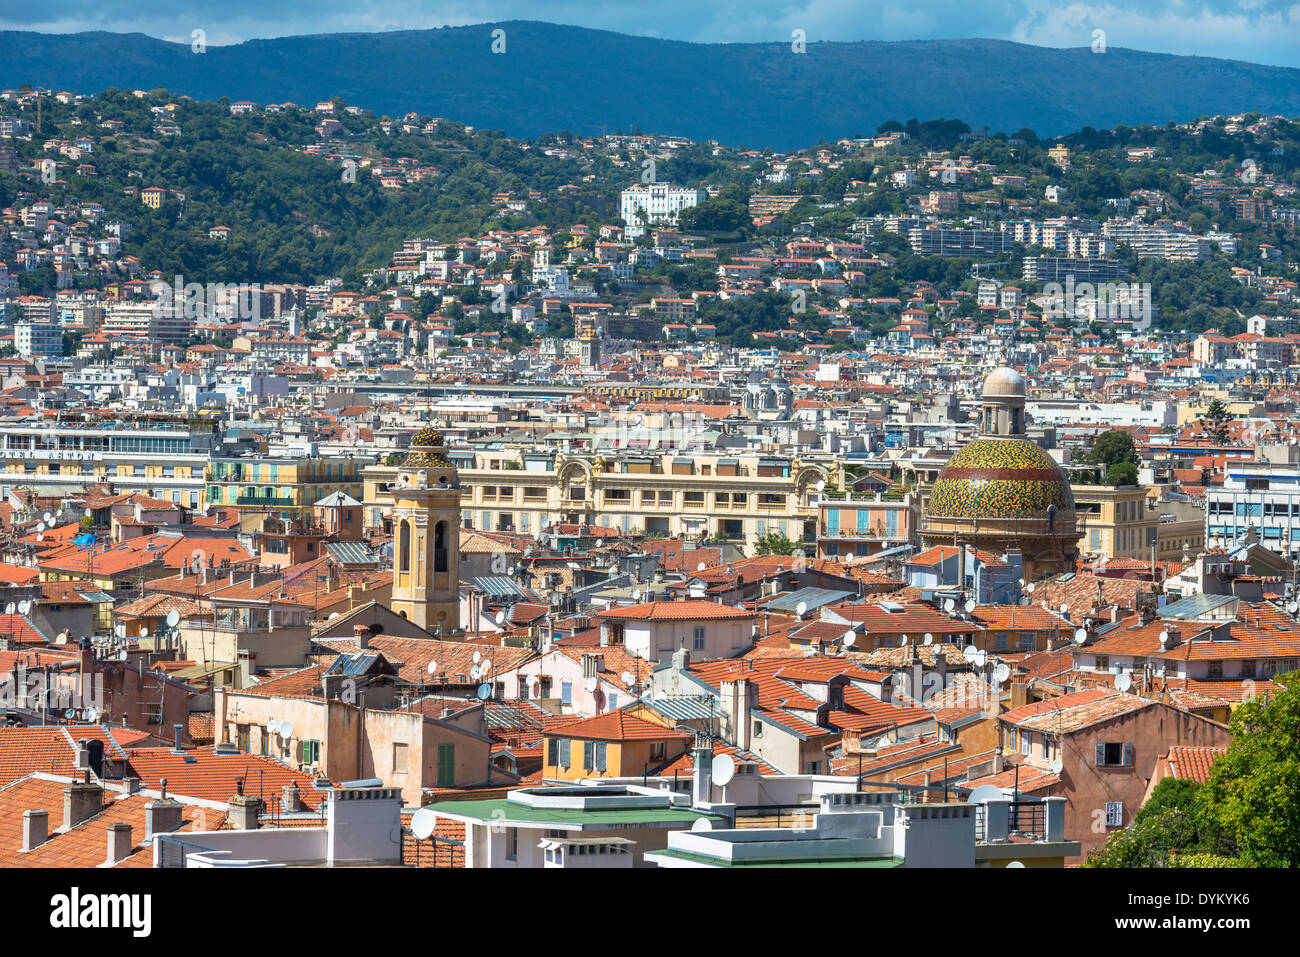 Aerial view of City of Nice, France Stock Photo